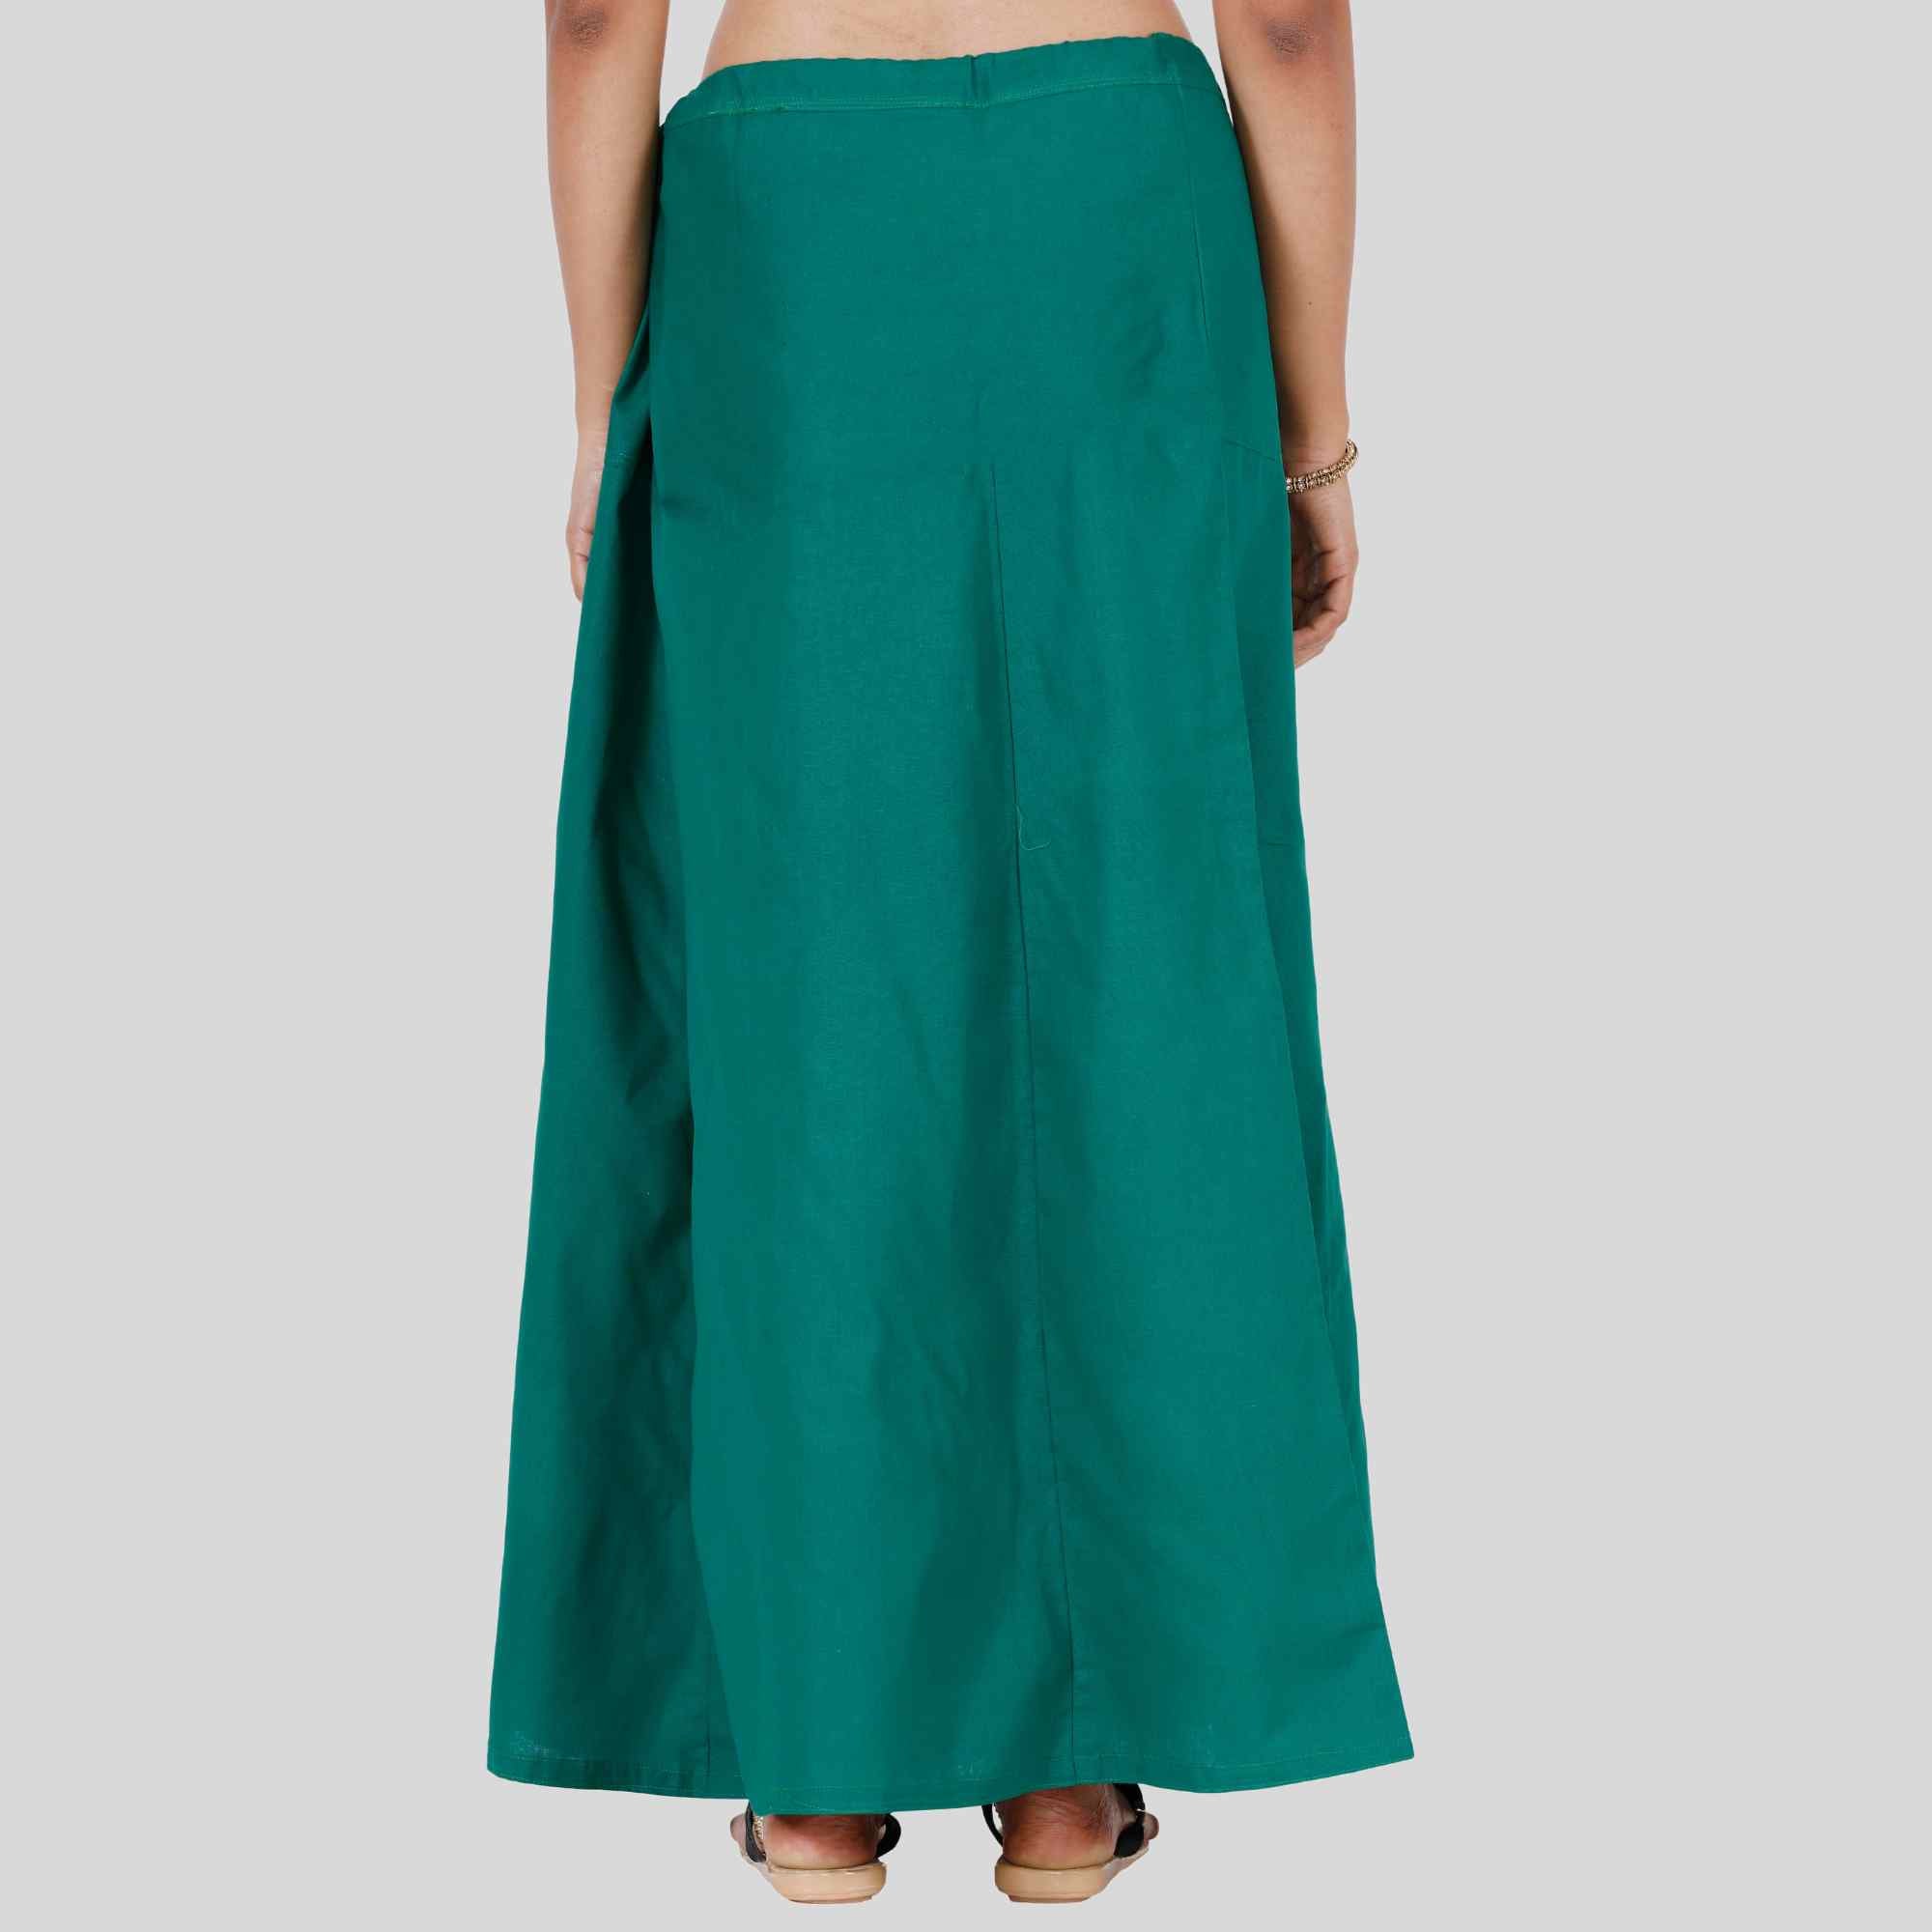 cotton petticoats online in peacock green